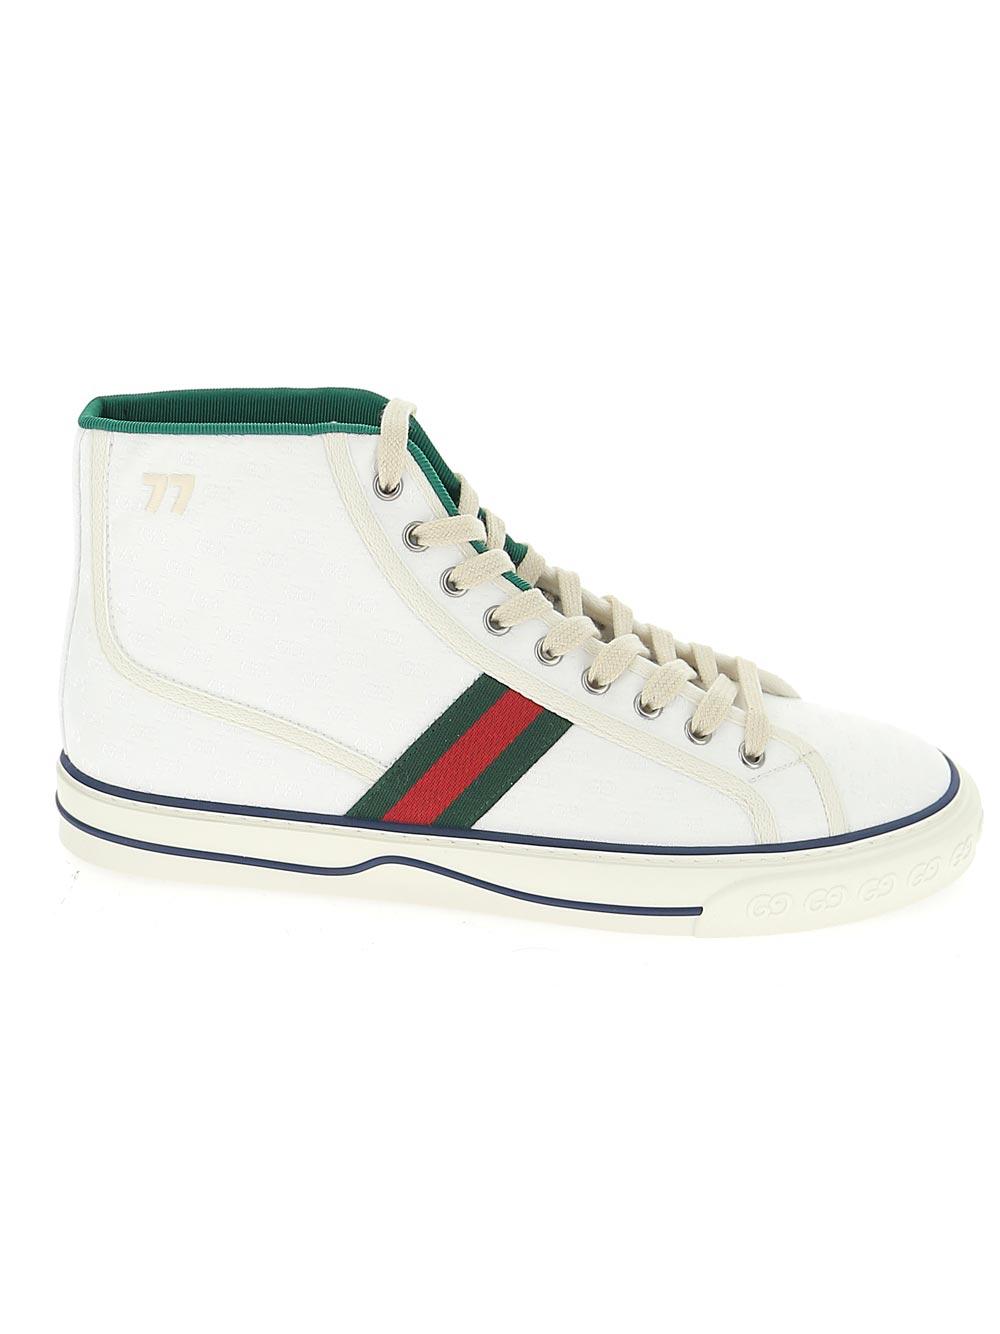 Gucci Rubber Tennis 1977 High Top Sneakers in White for Men - Lyst